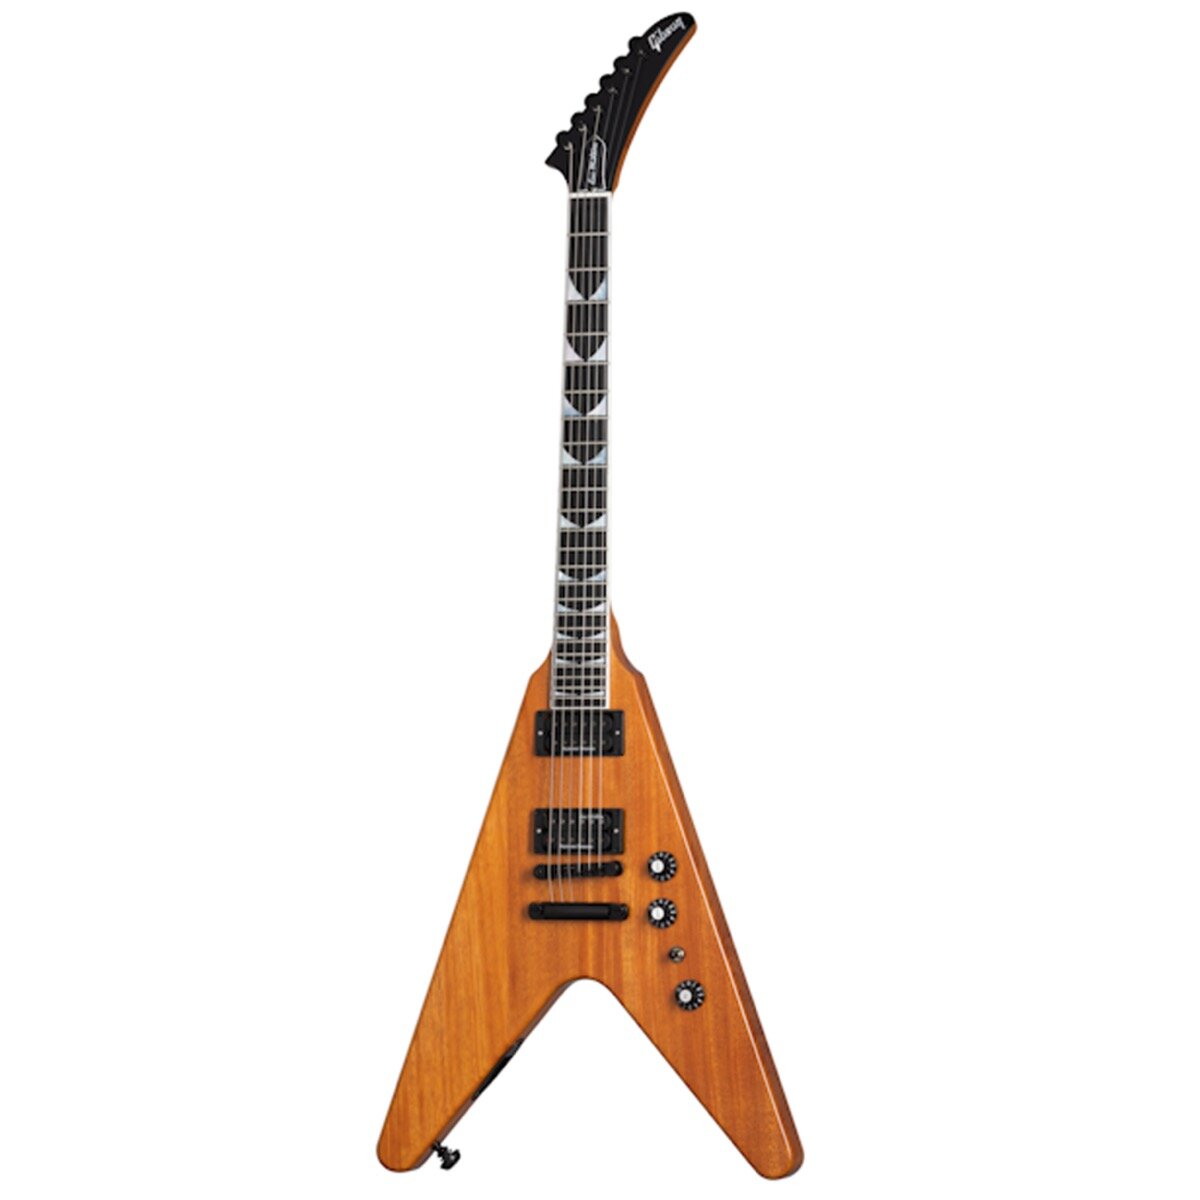 Gibson Dave Mustaine Flying V EXP Ant Natural W/C -  DSVX00ANBC1